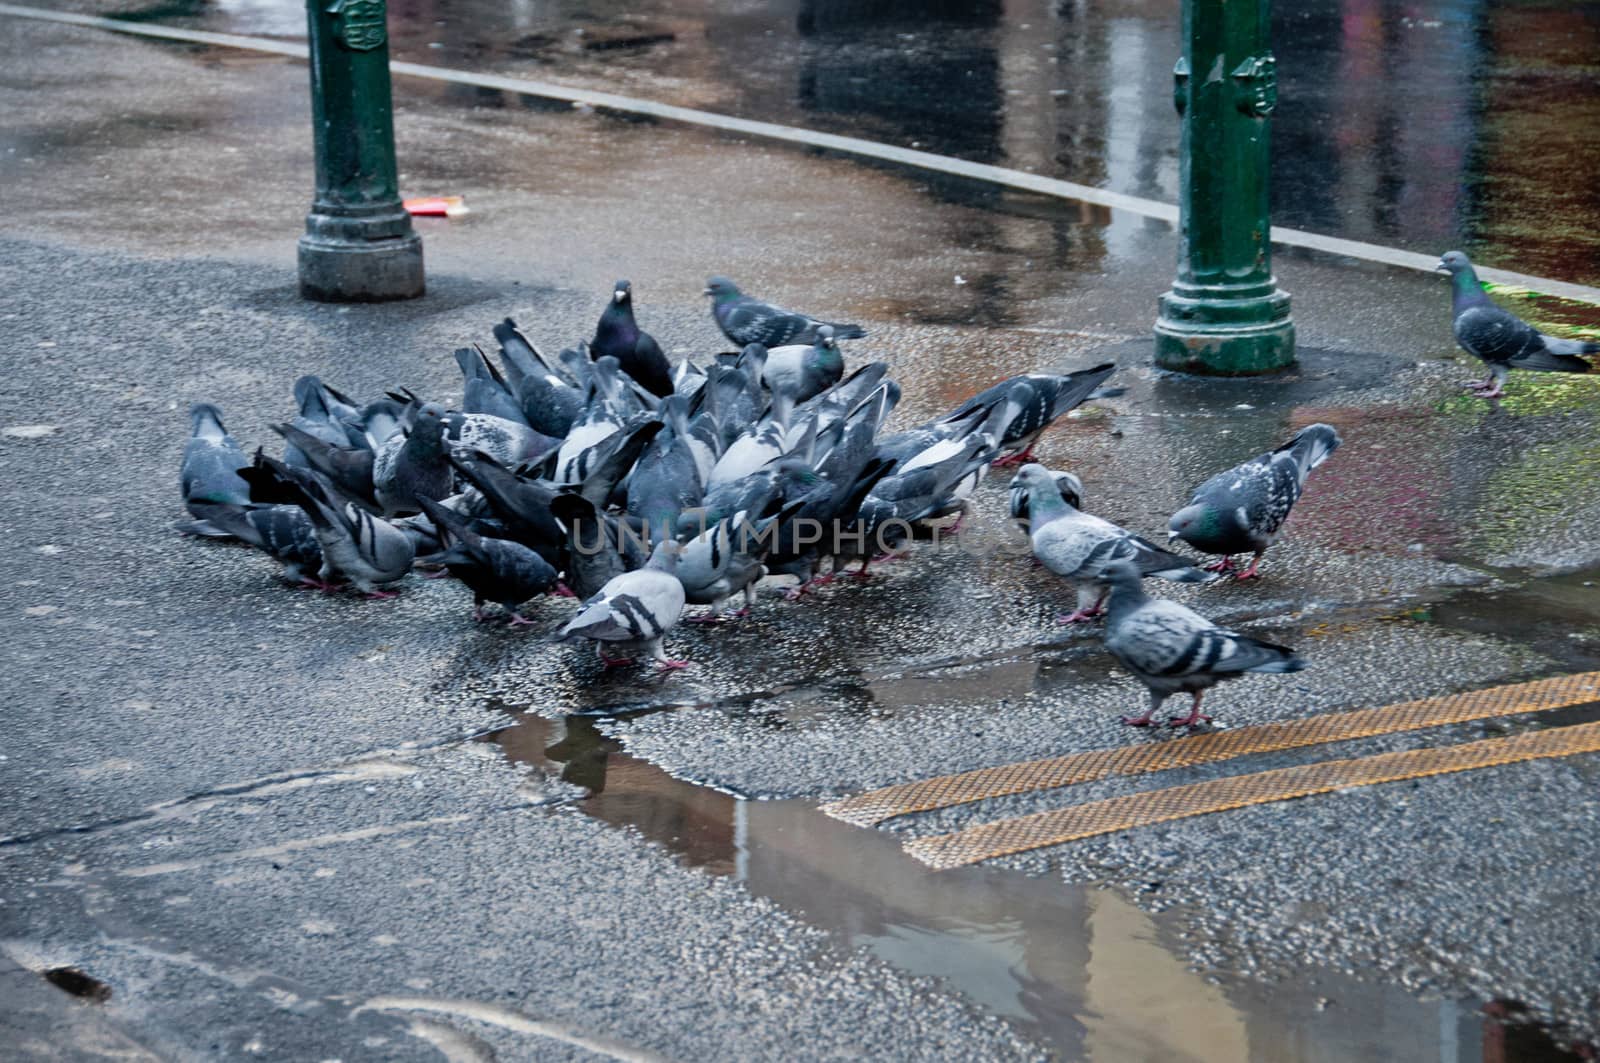 Group of Pigeons eating bird food on a street in rainy day in city center